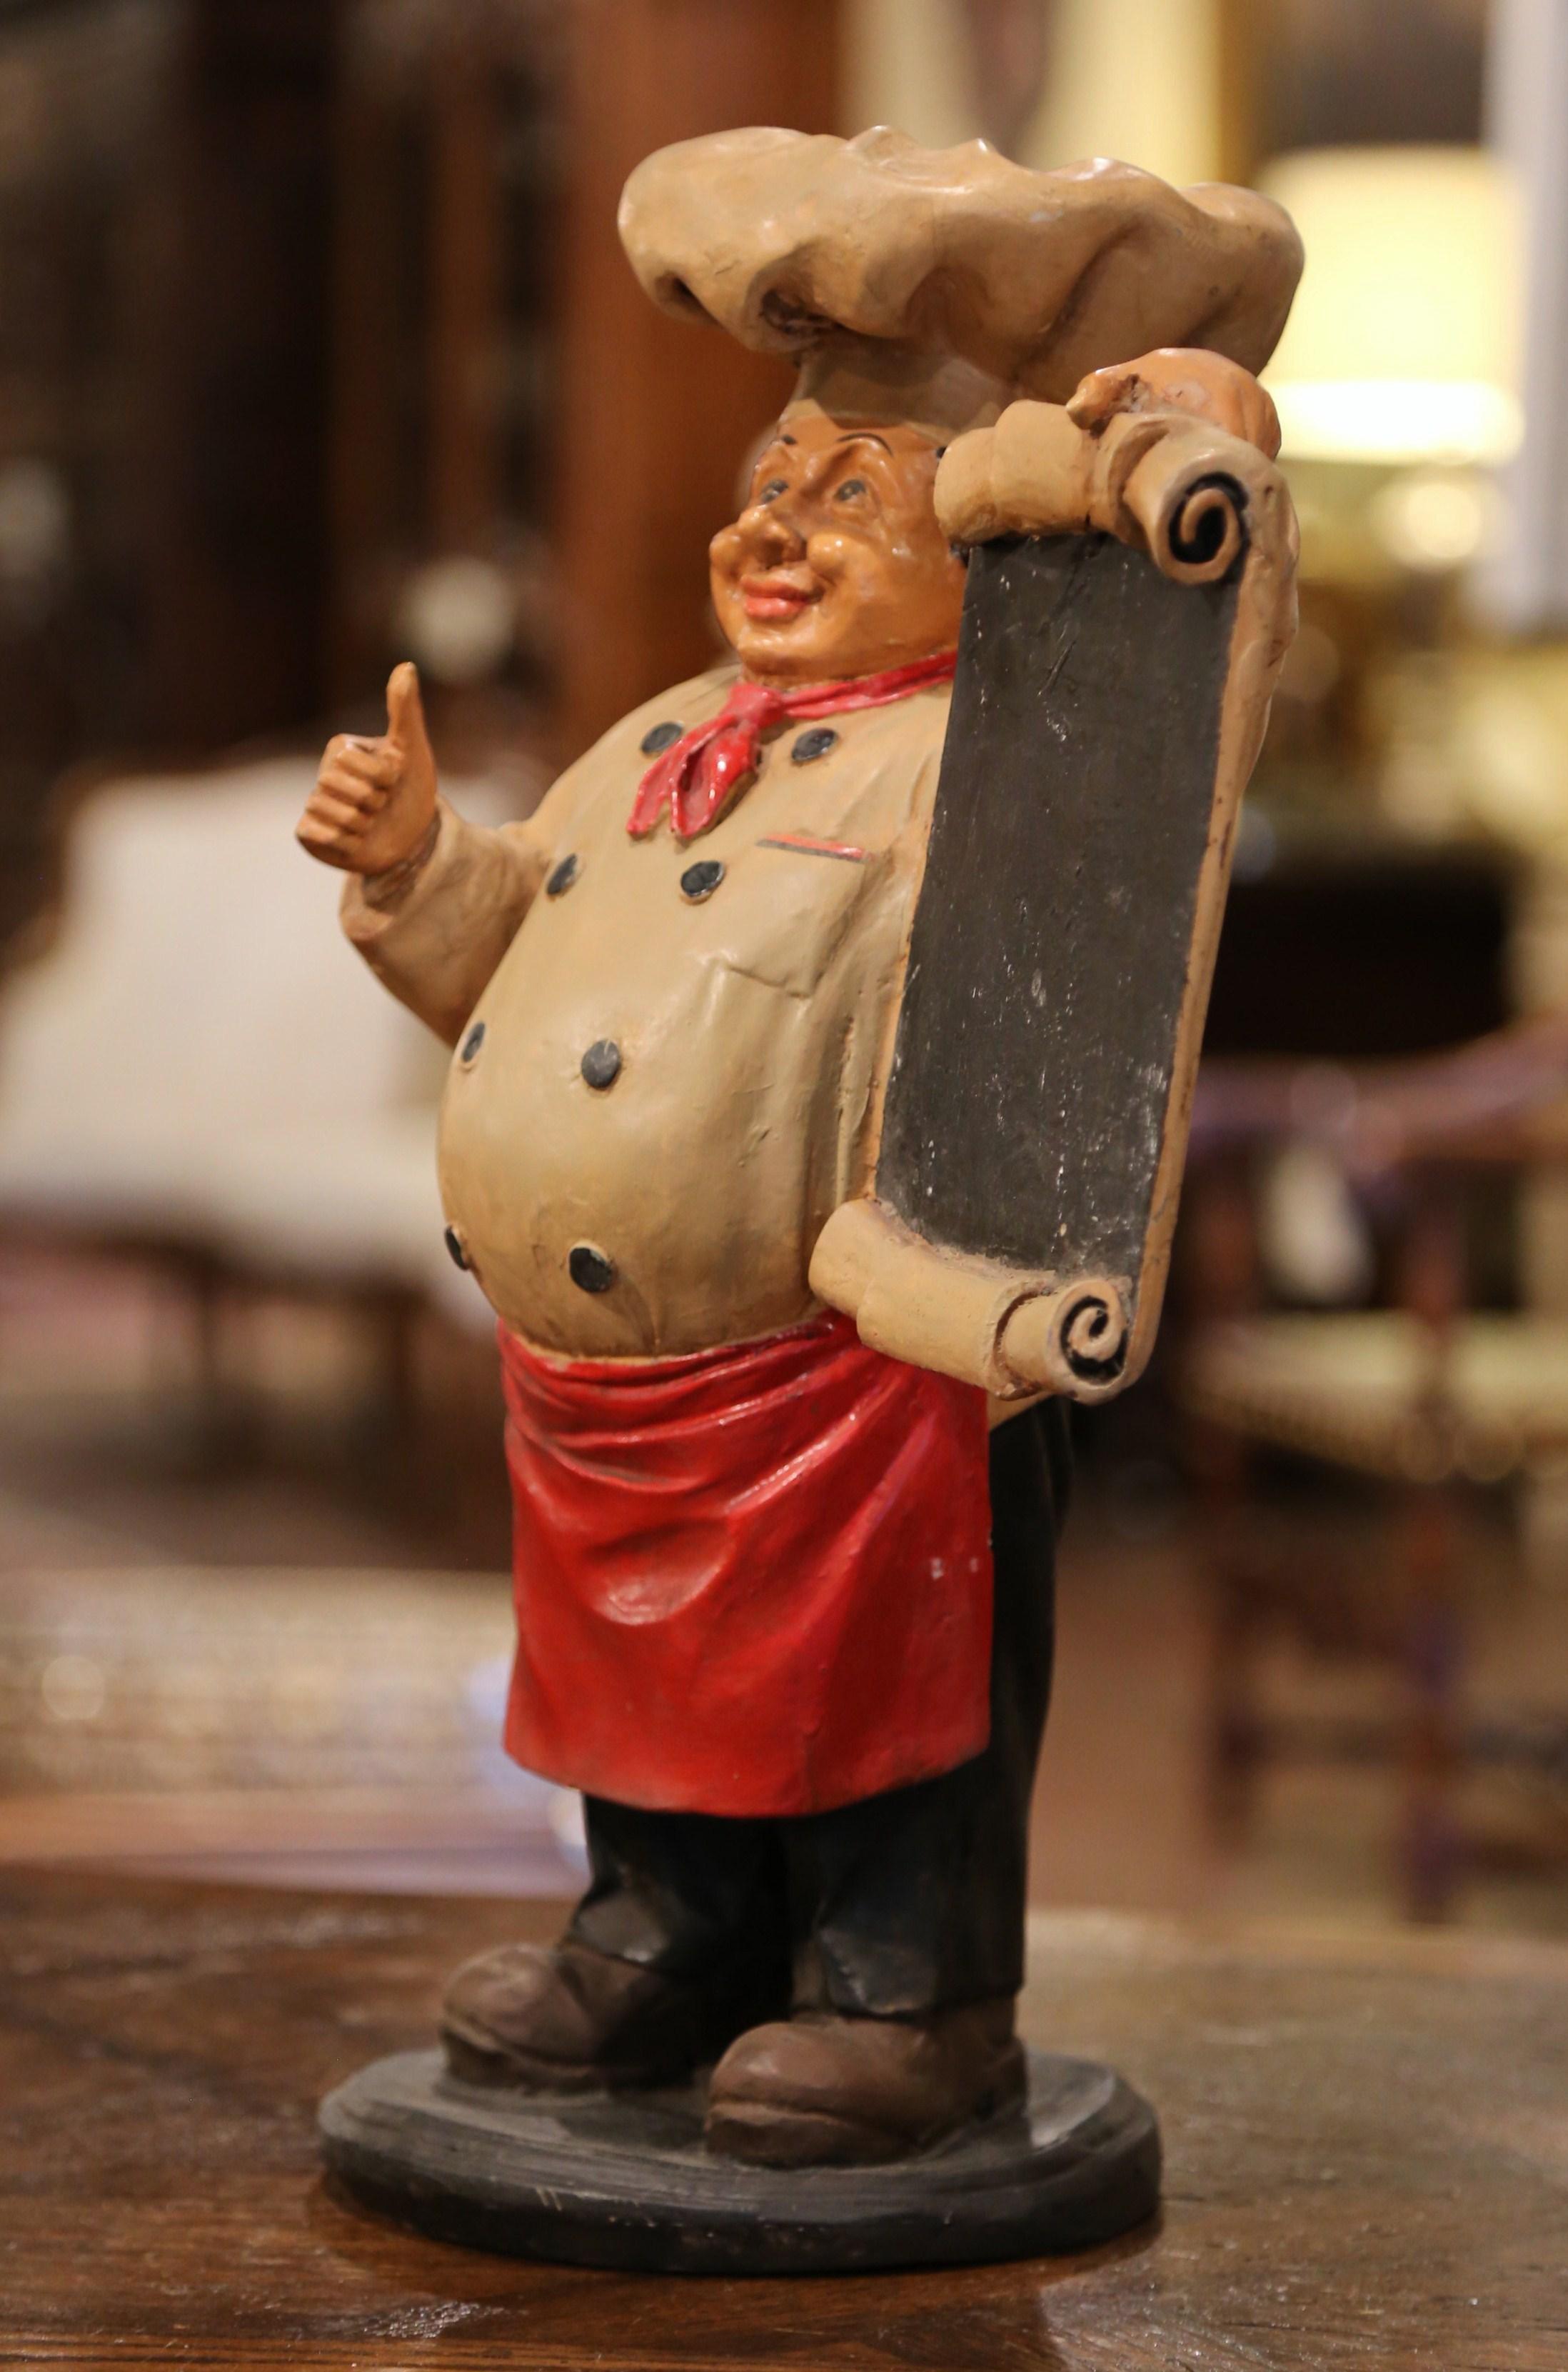 Decorate a kitchen counter with this colorful antique restaurant sign figure. Crafted in France, circa 1920, the piece made of 